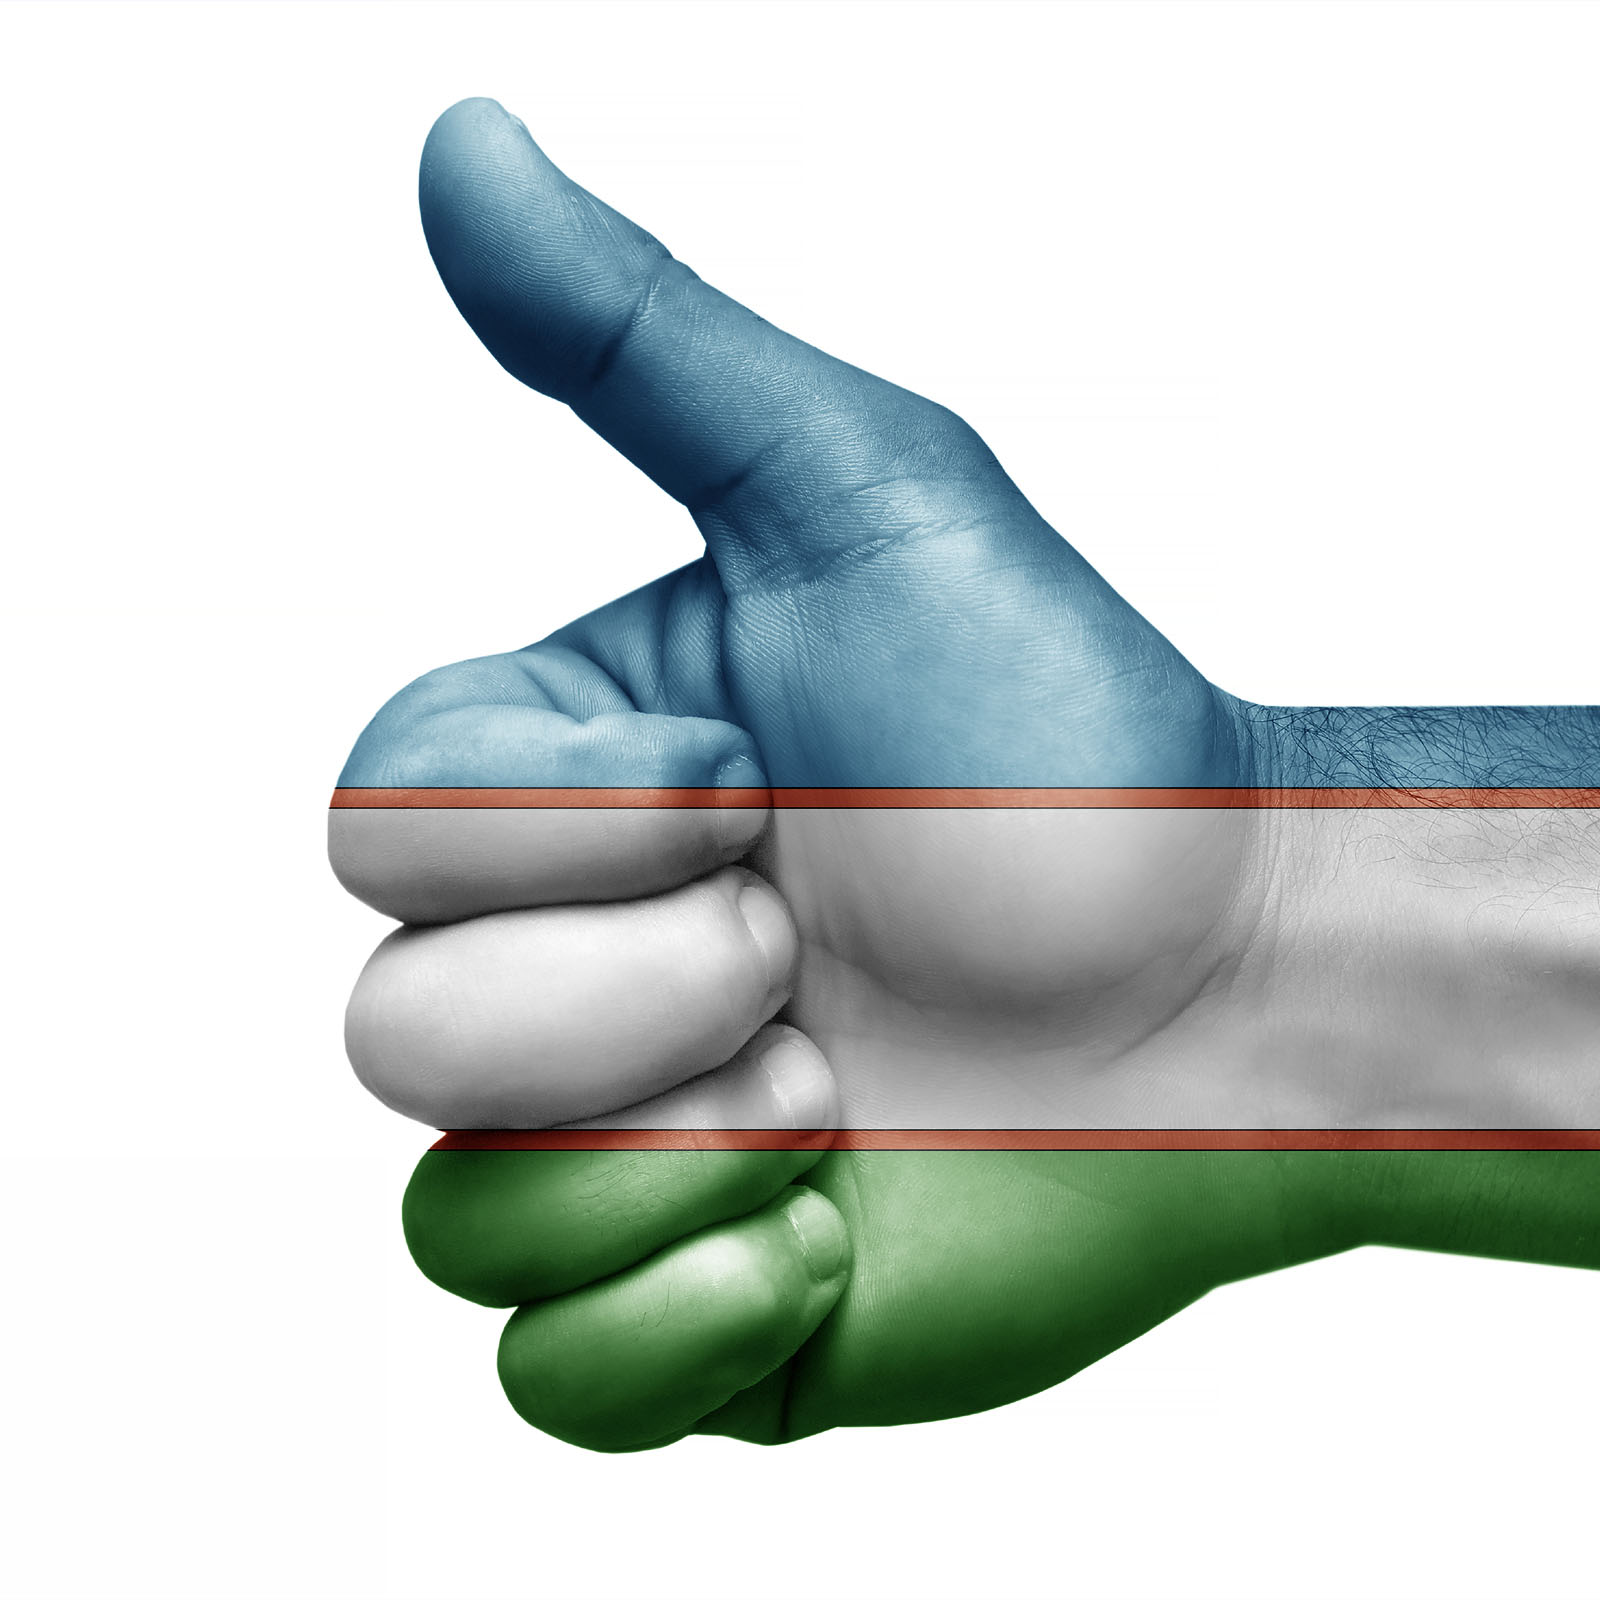 Uzbekistan to Legalize Bitcoin and Support Developers